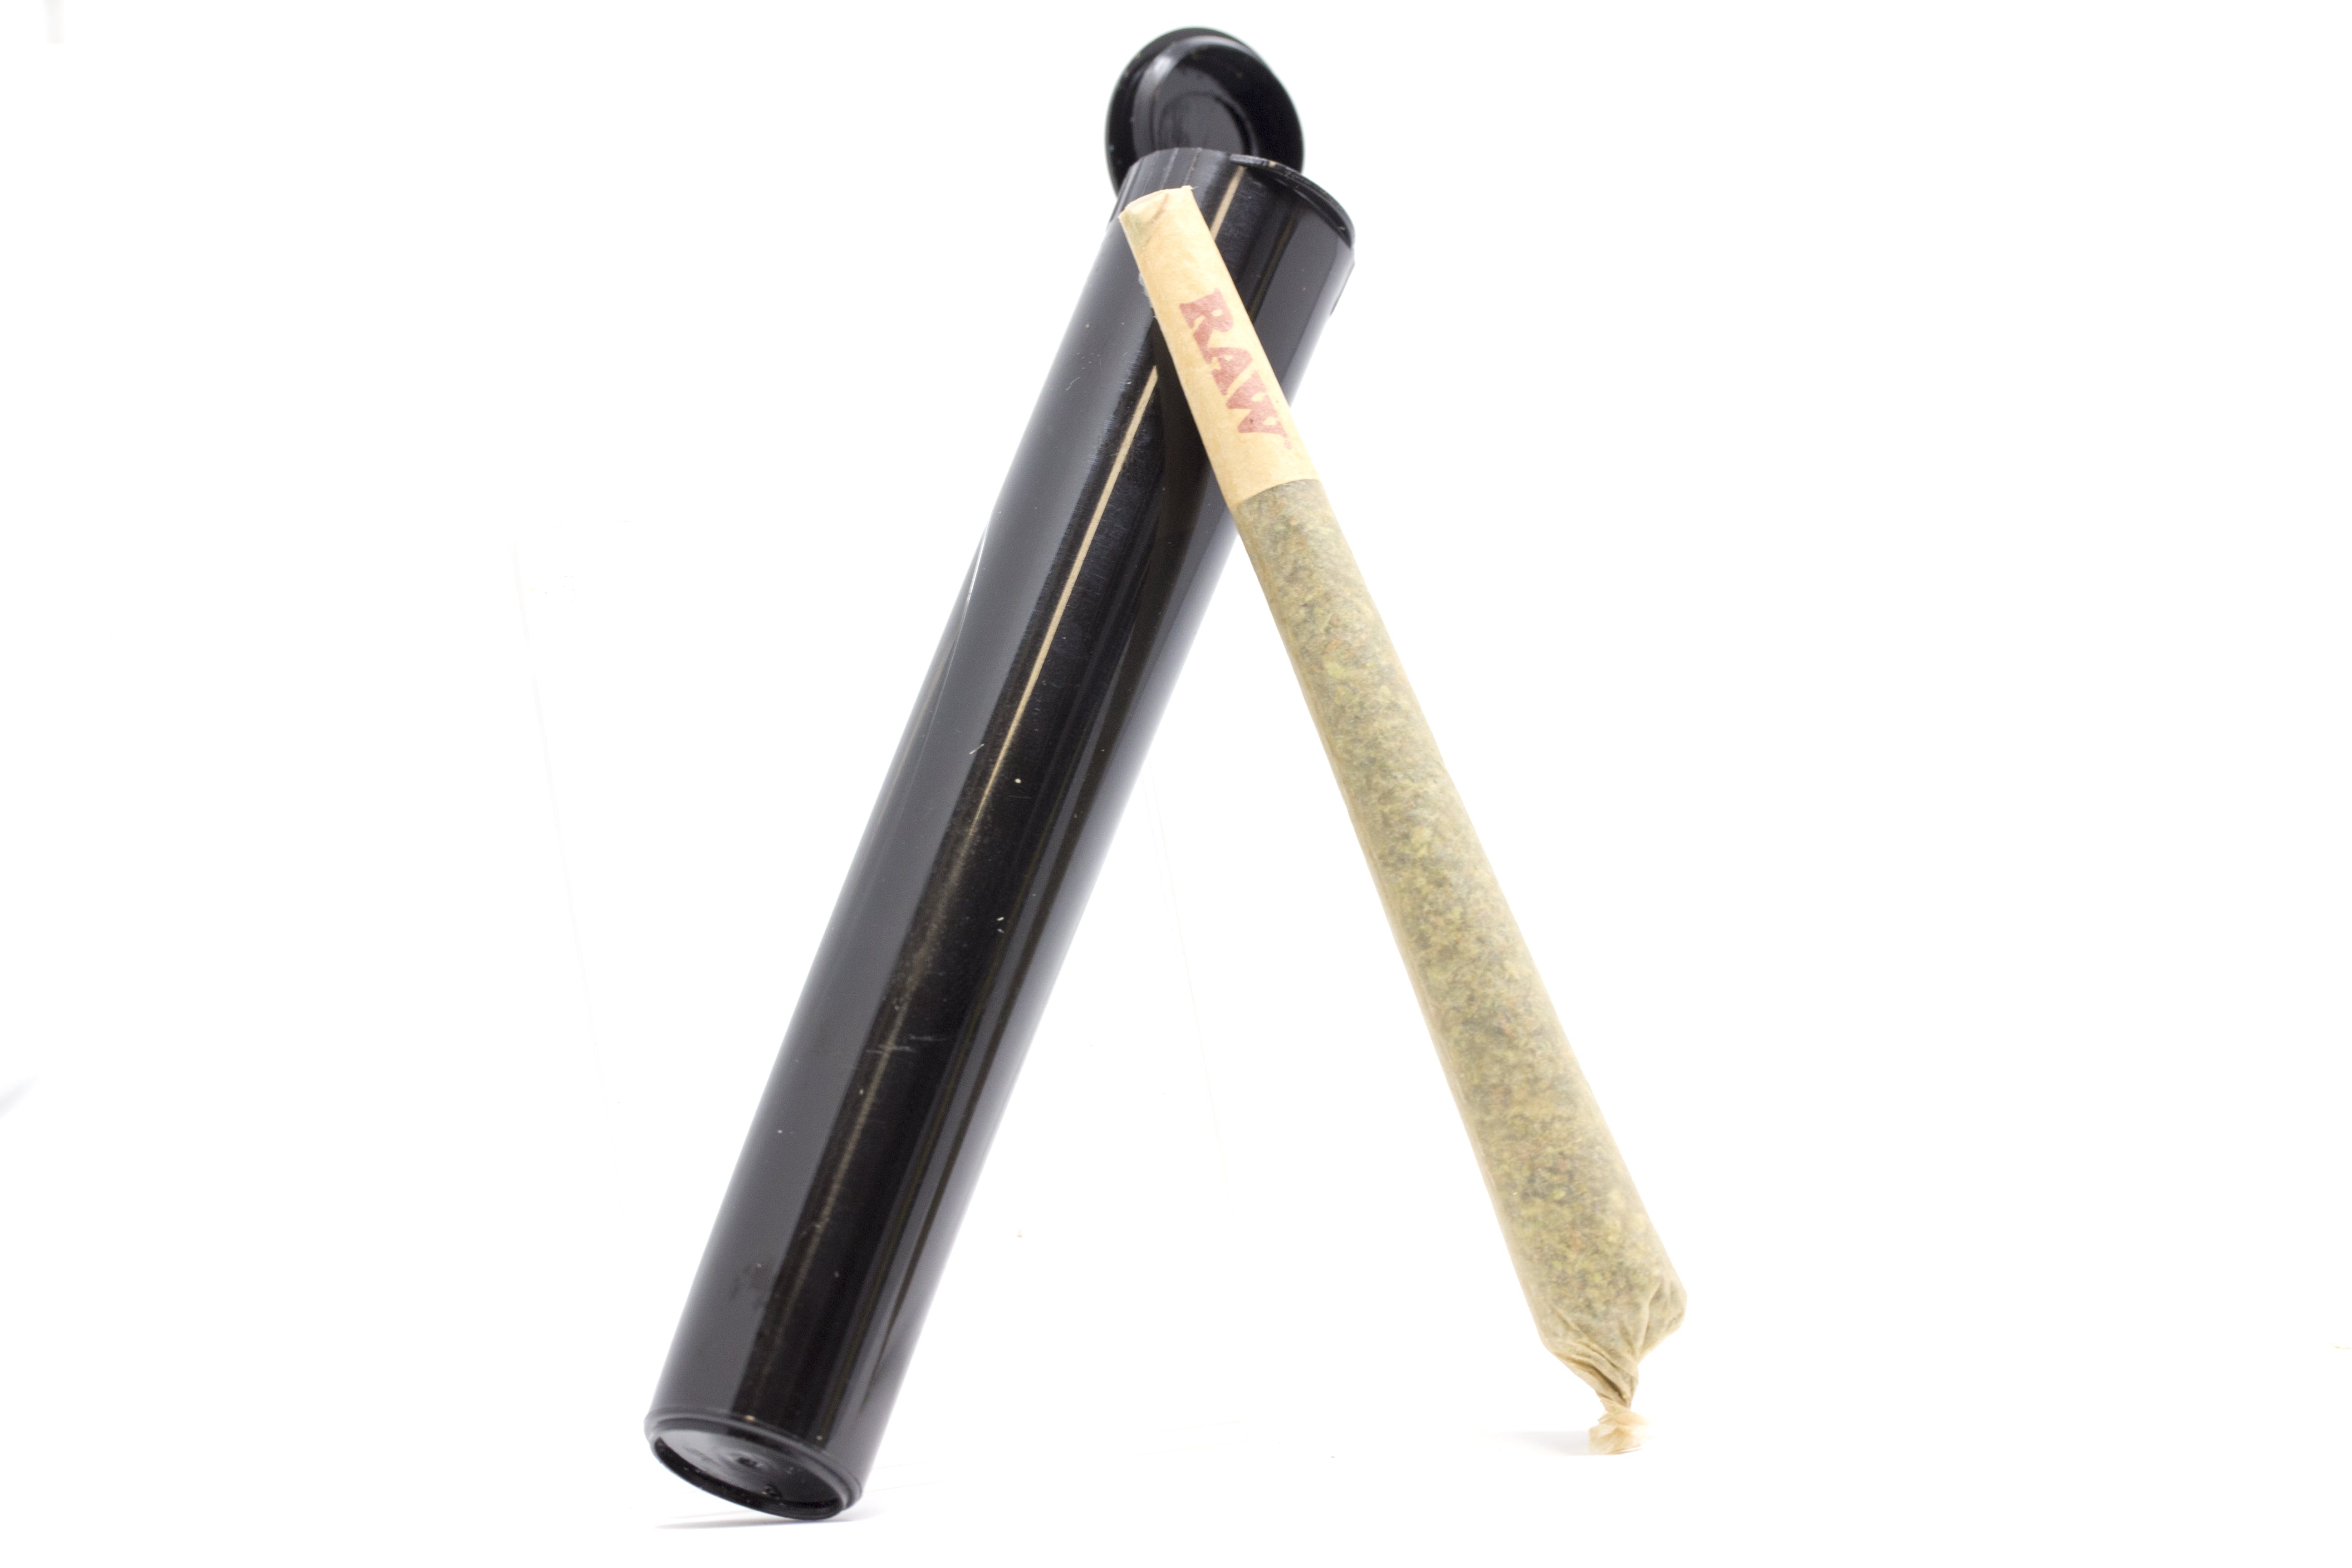 preroll-asteroid-og-hi-house-of-herbs-made-in-house